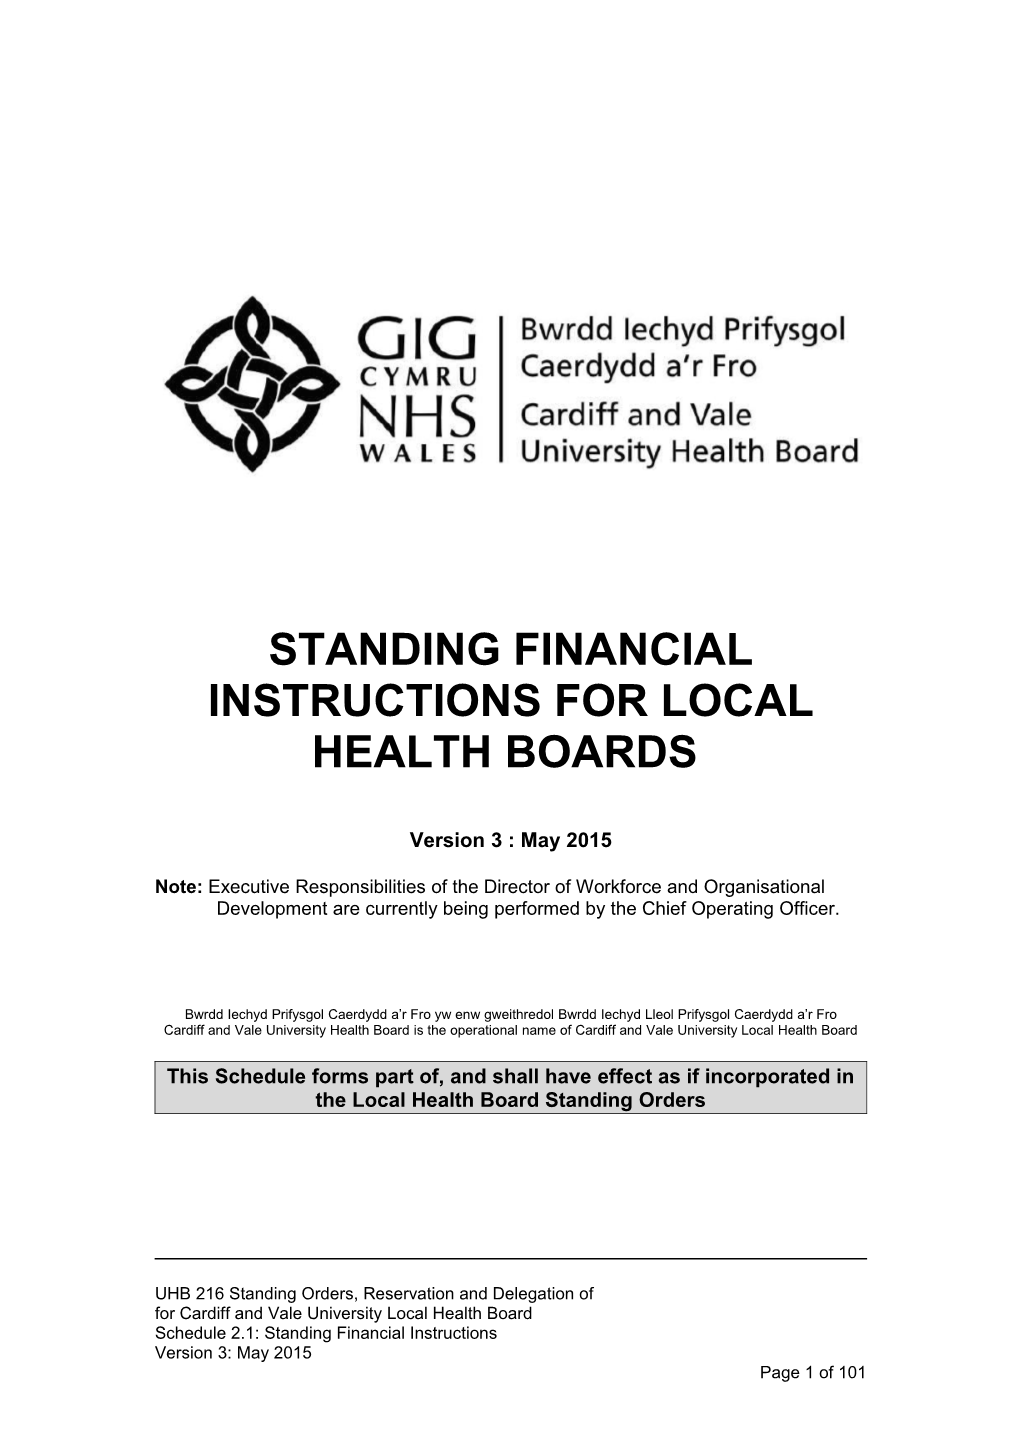 Standing Financial Instructions for Local Health Boards